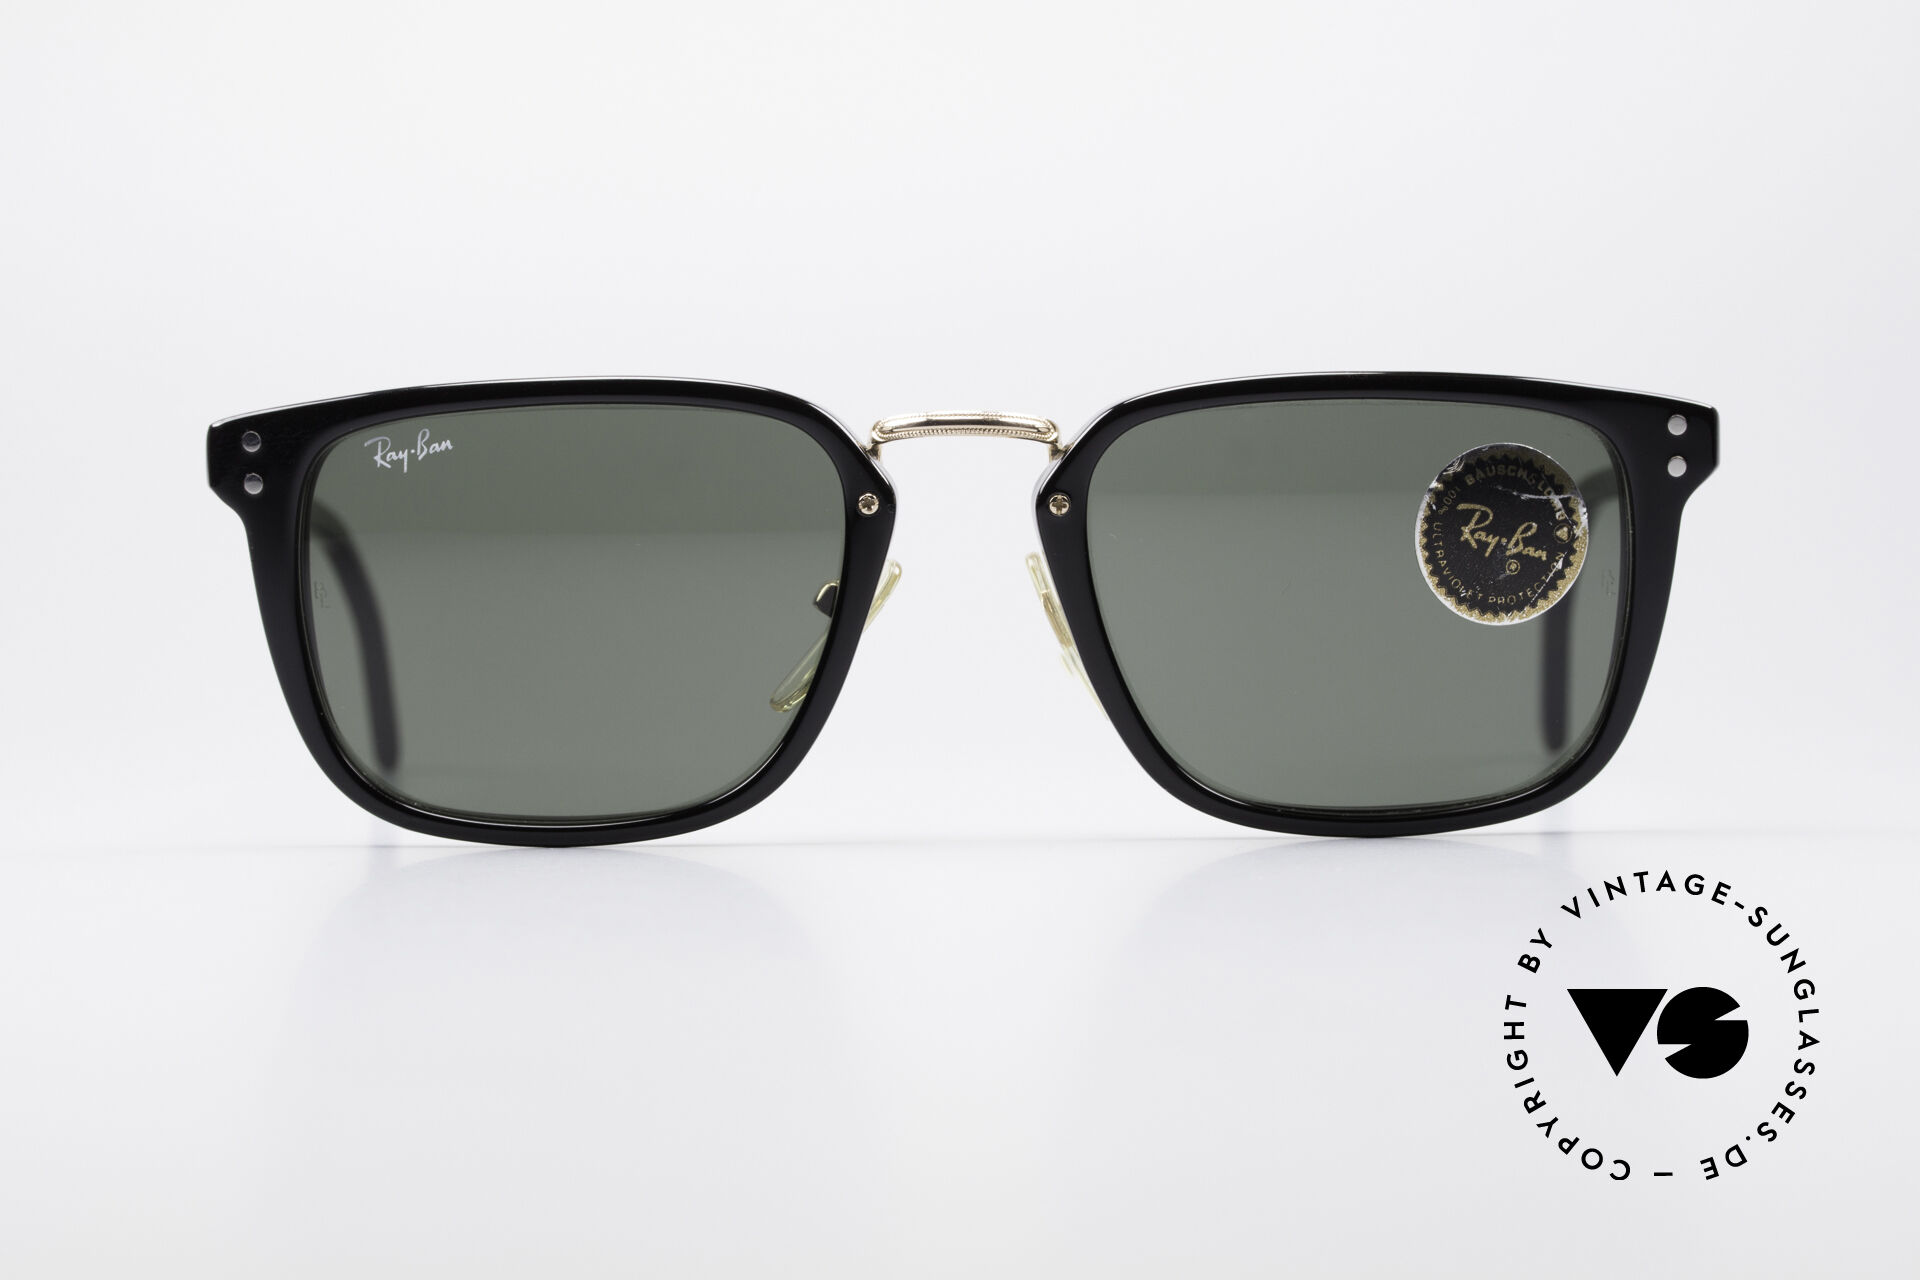 Sunglasses Ray Ban Traditionals Premier E Classic Vintage Shades